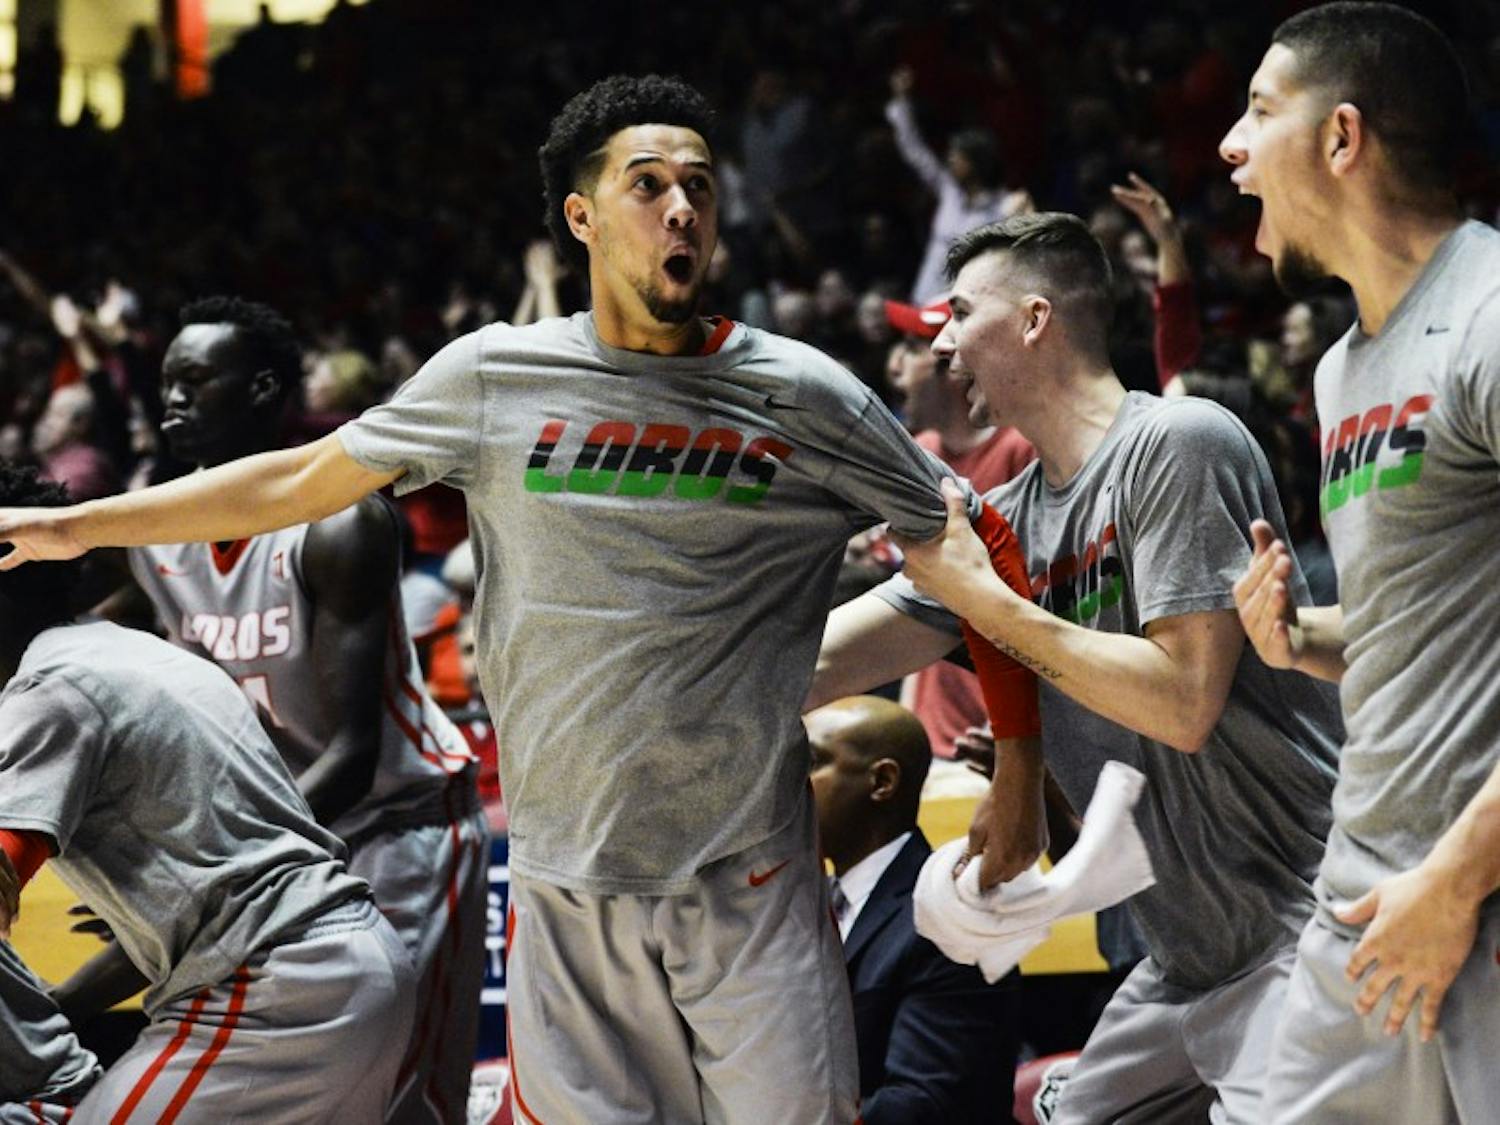 The Lobo bench erupts in celebration as a shot was made against Boise State at WisePies Arena. Head coach Craig Neal held his end-of-season press conference this week, saying his young team gained valuable experience this season. 